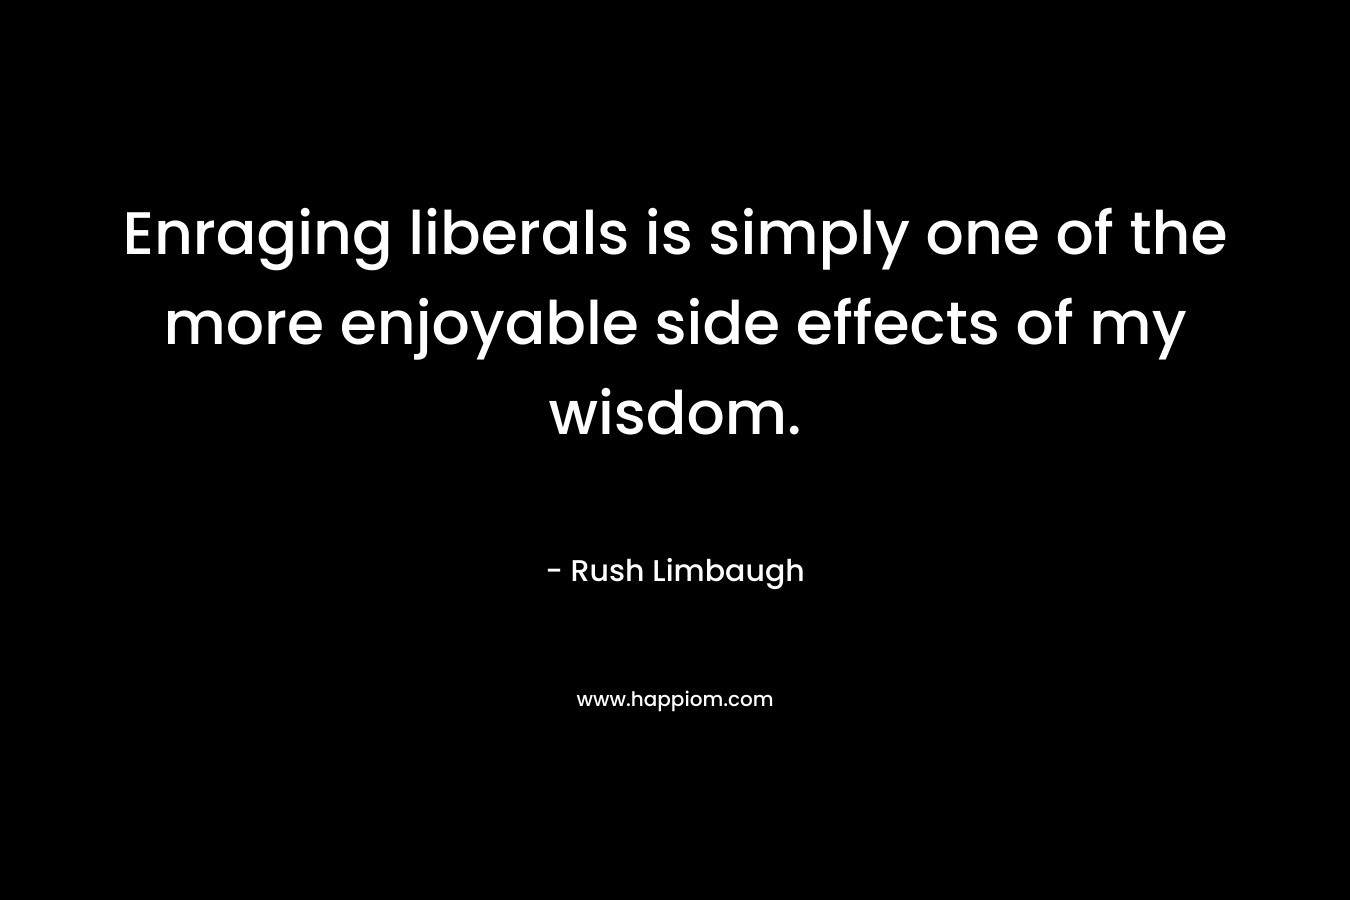 Enraging liberals is simply one of the more enjoyable side effects of my wisdom. – Rush Limbaugh